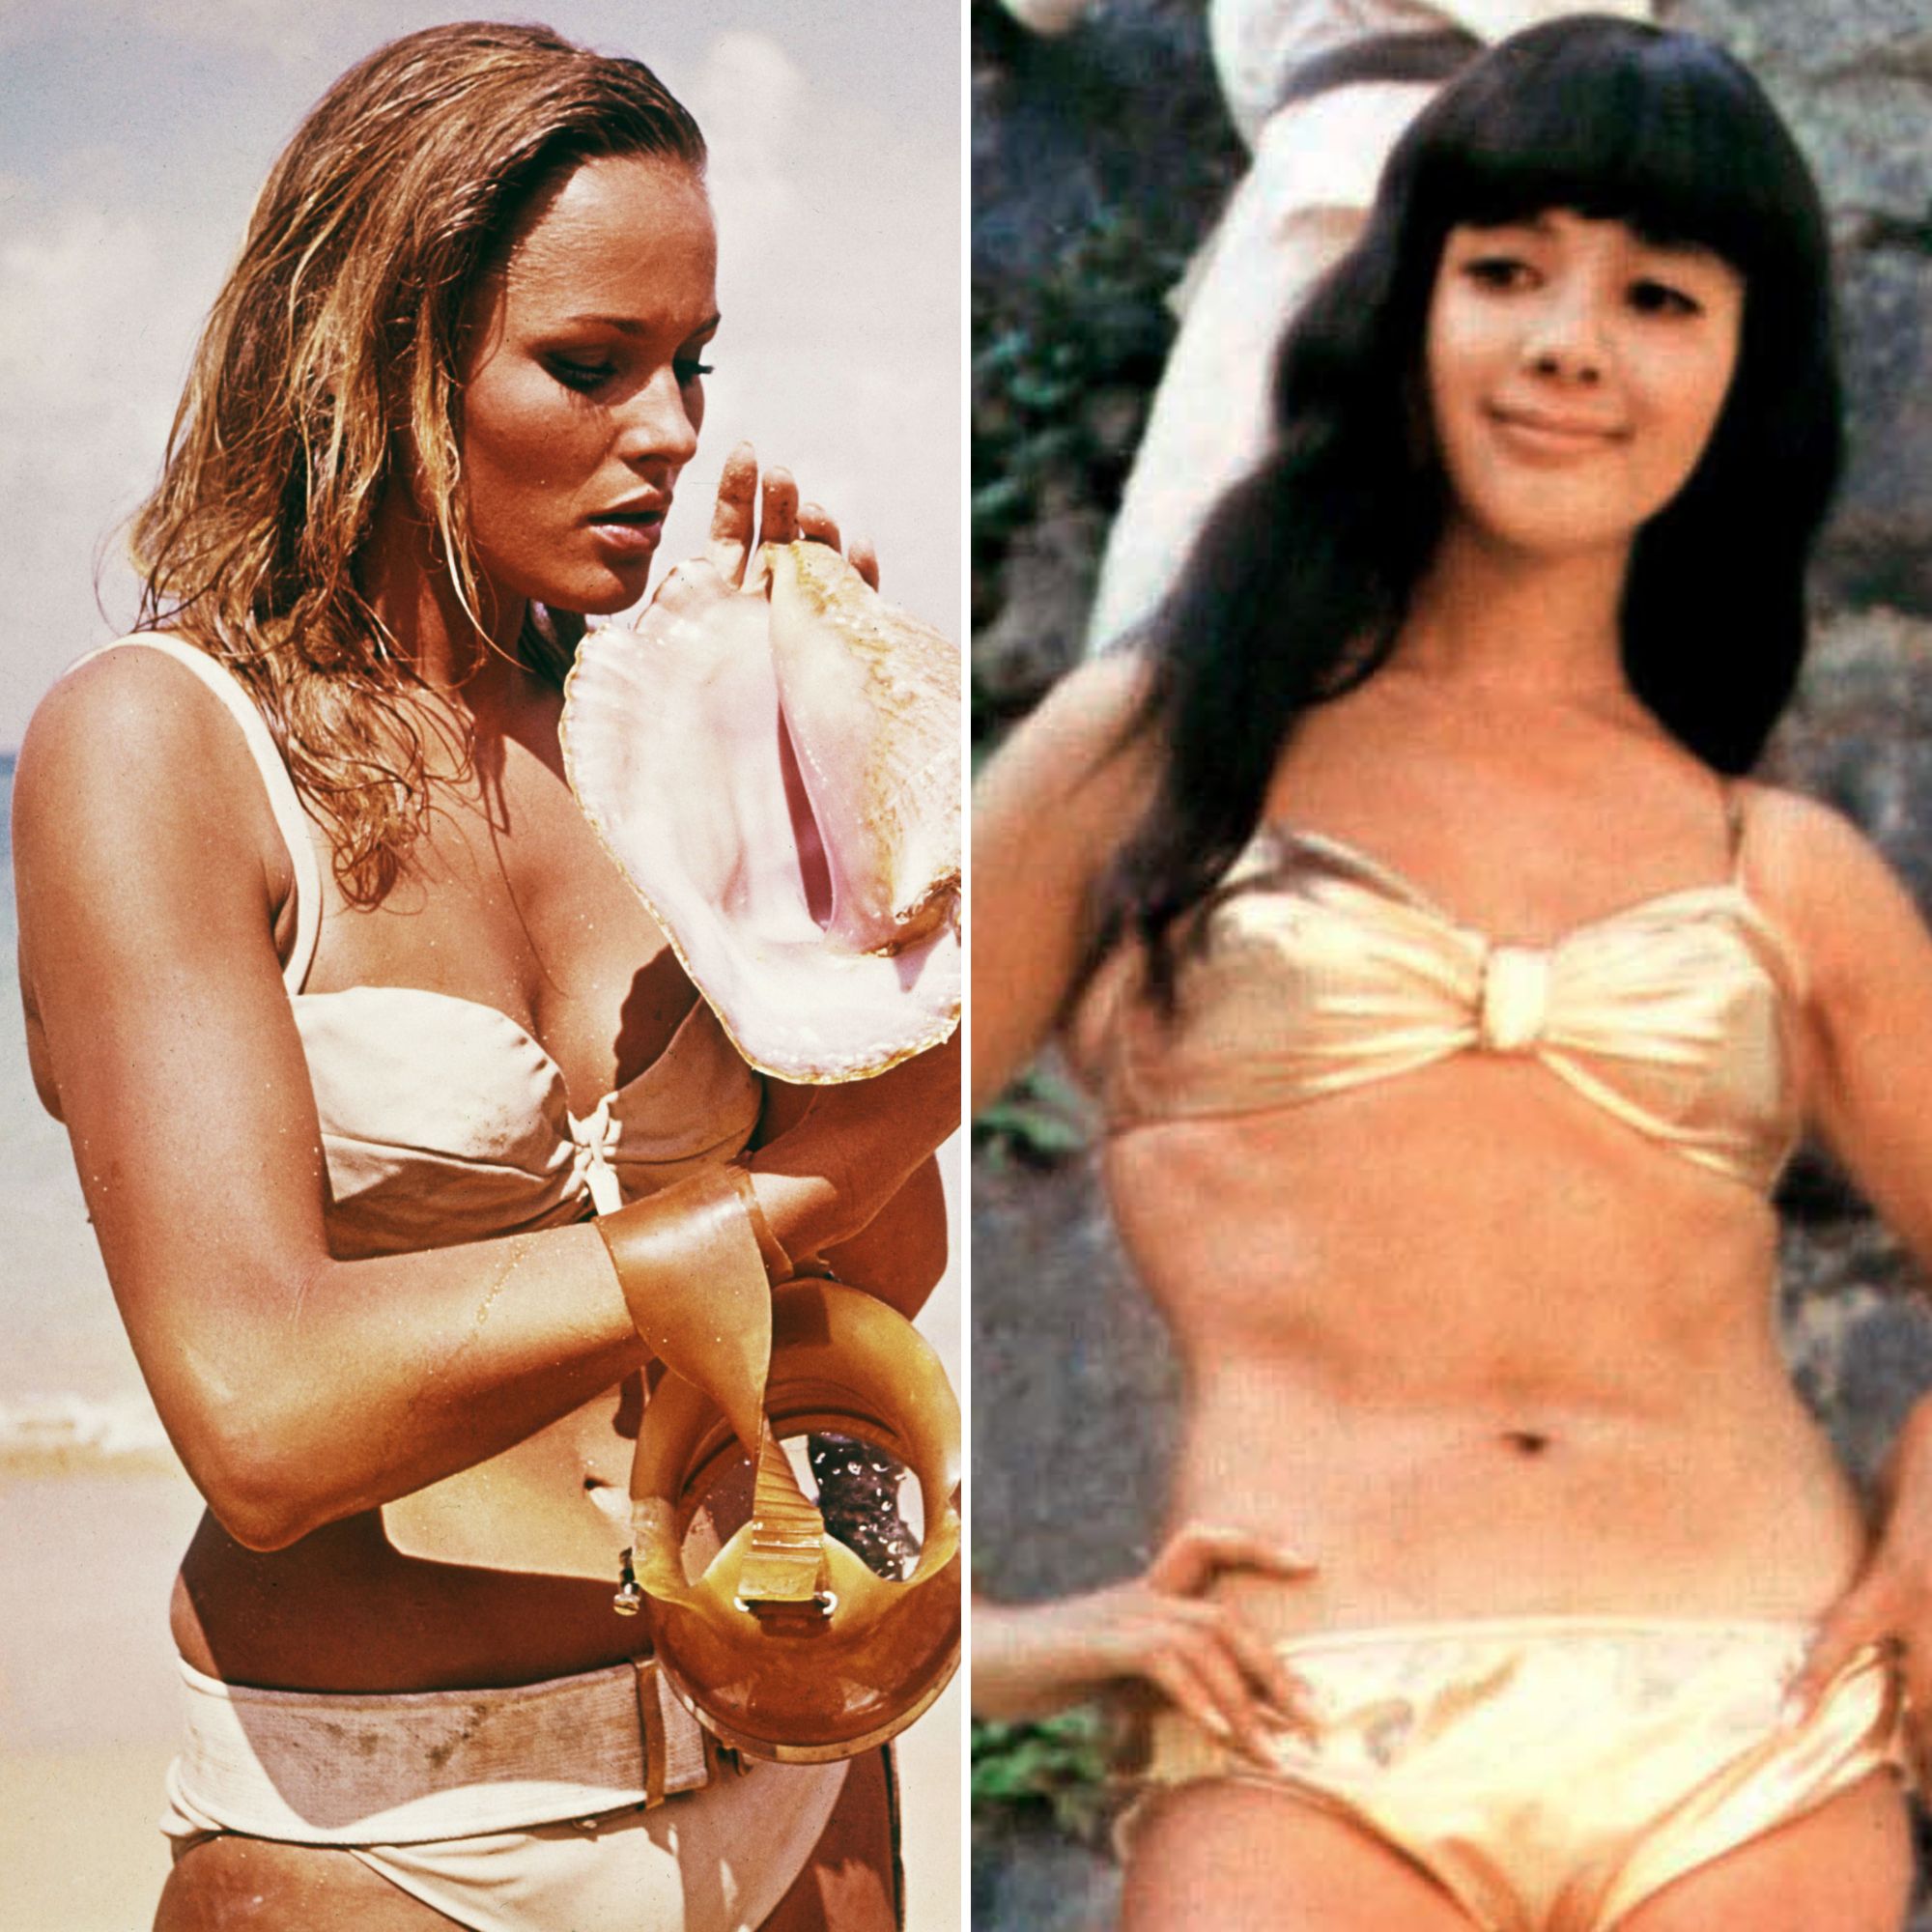 Bond Girls Bikini Photos Their Sexiest Swimsuit Pictures picture